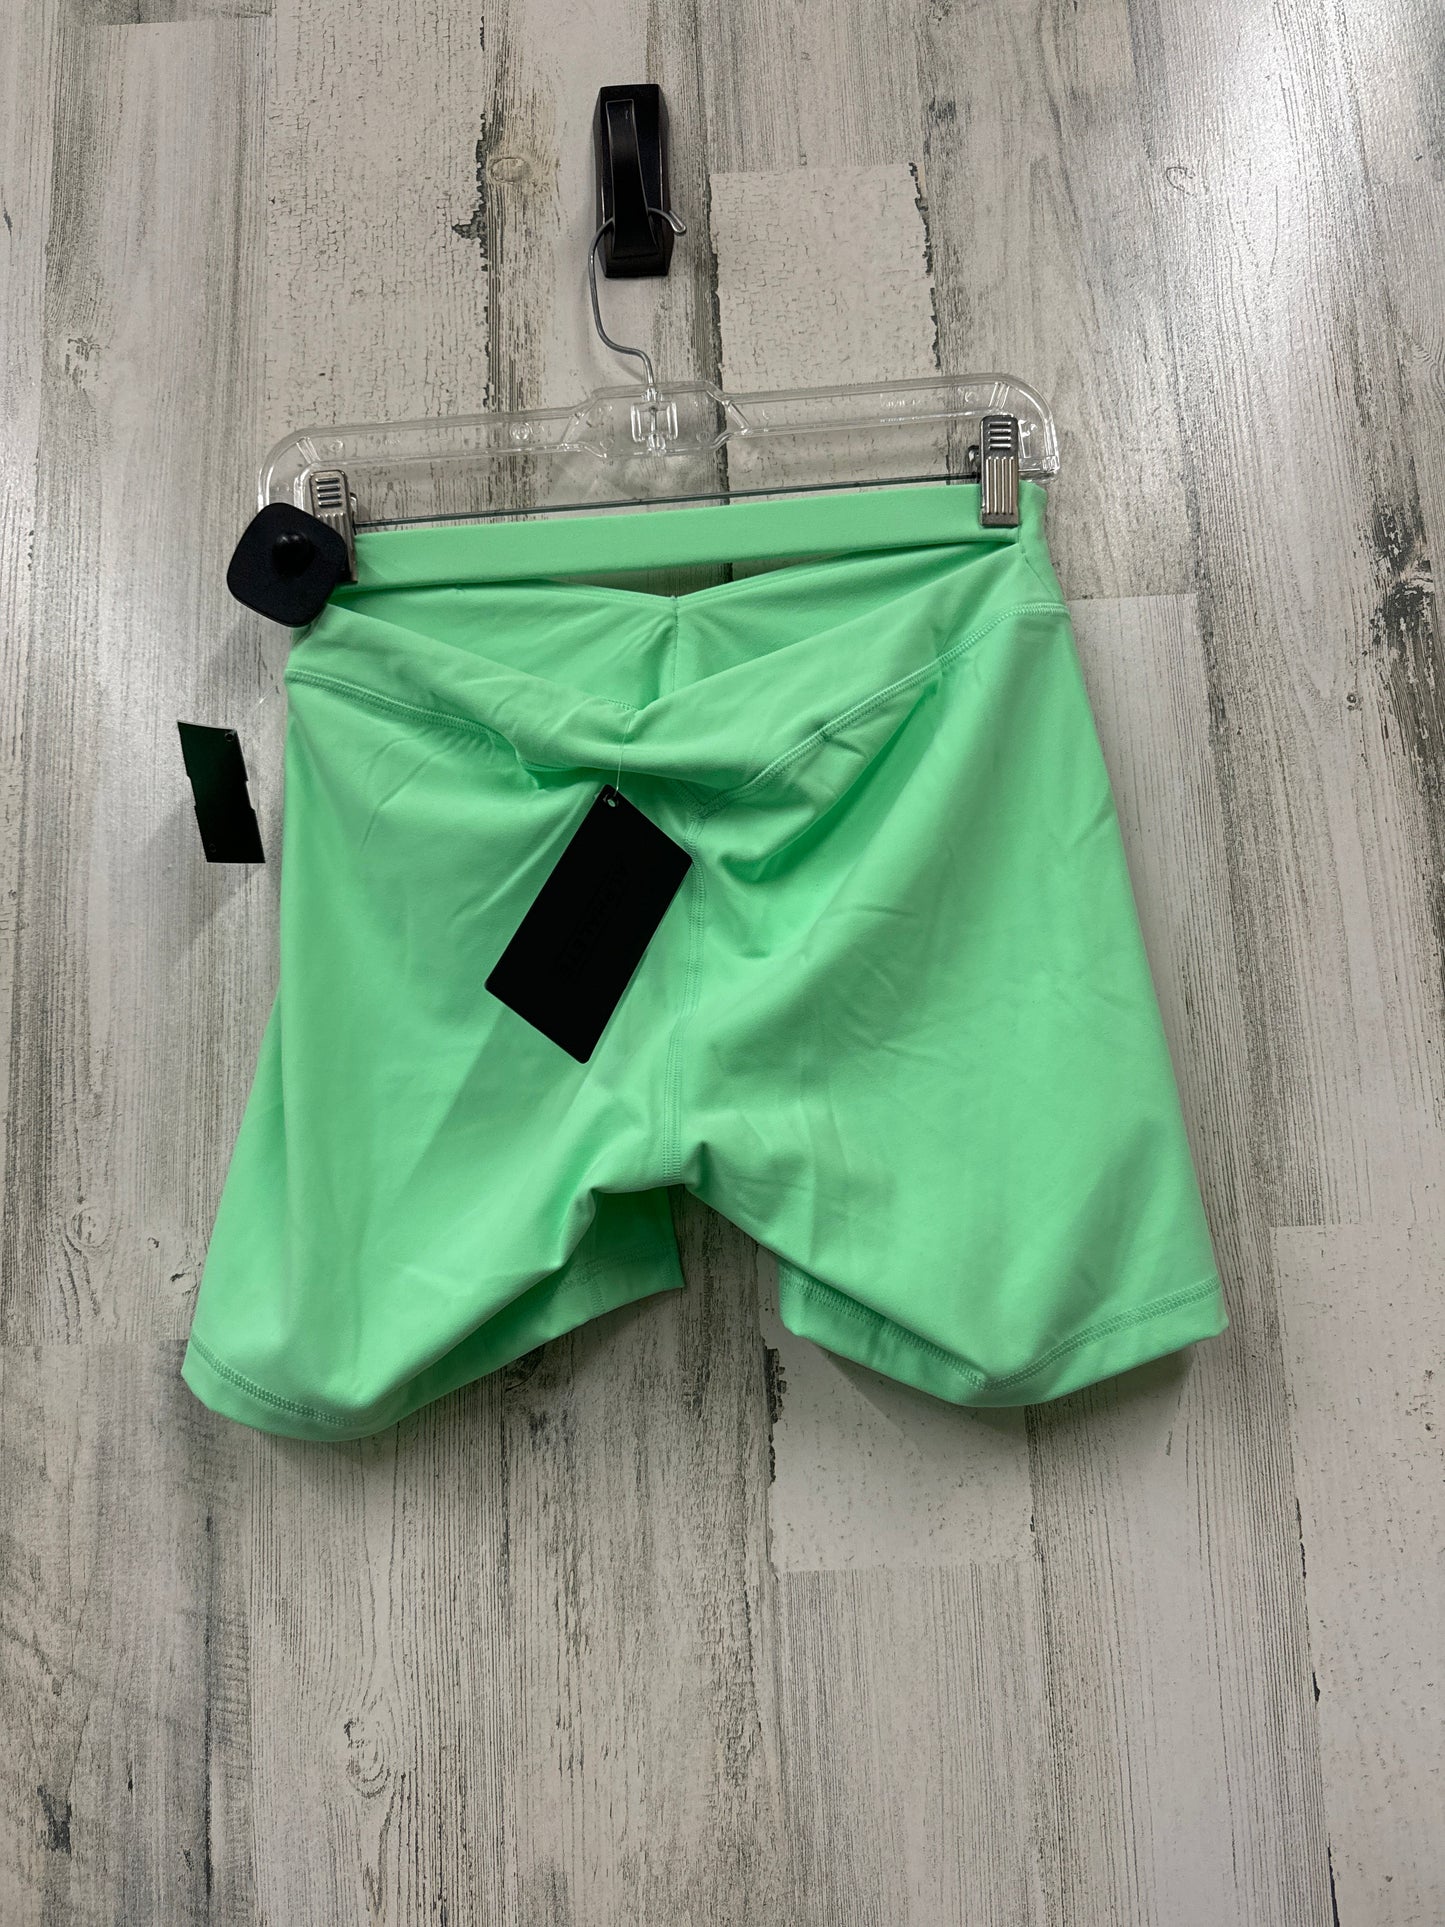 Green Athletic Shorts Clothes Mentor, Size Xl